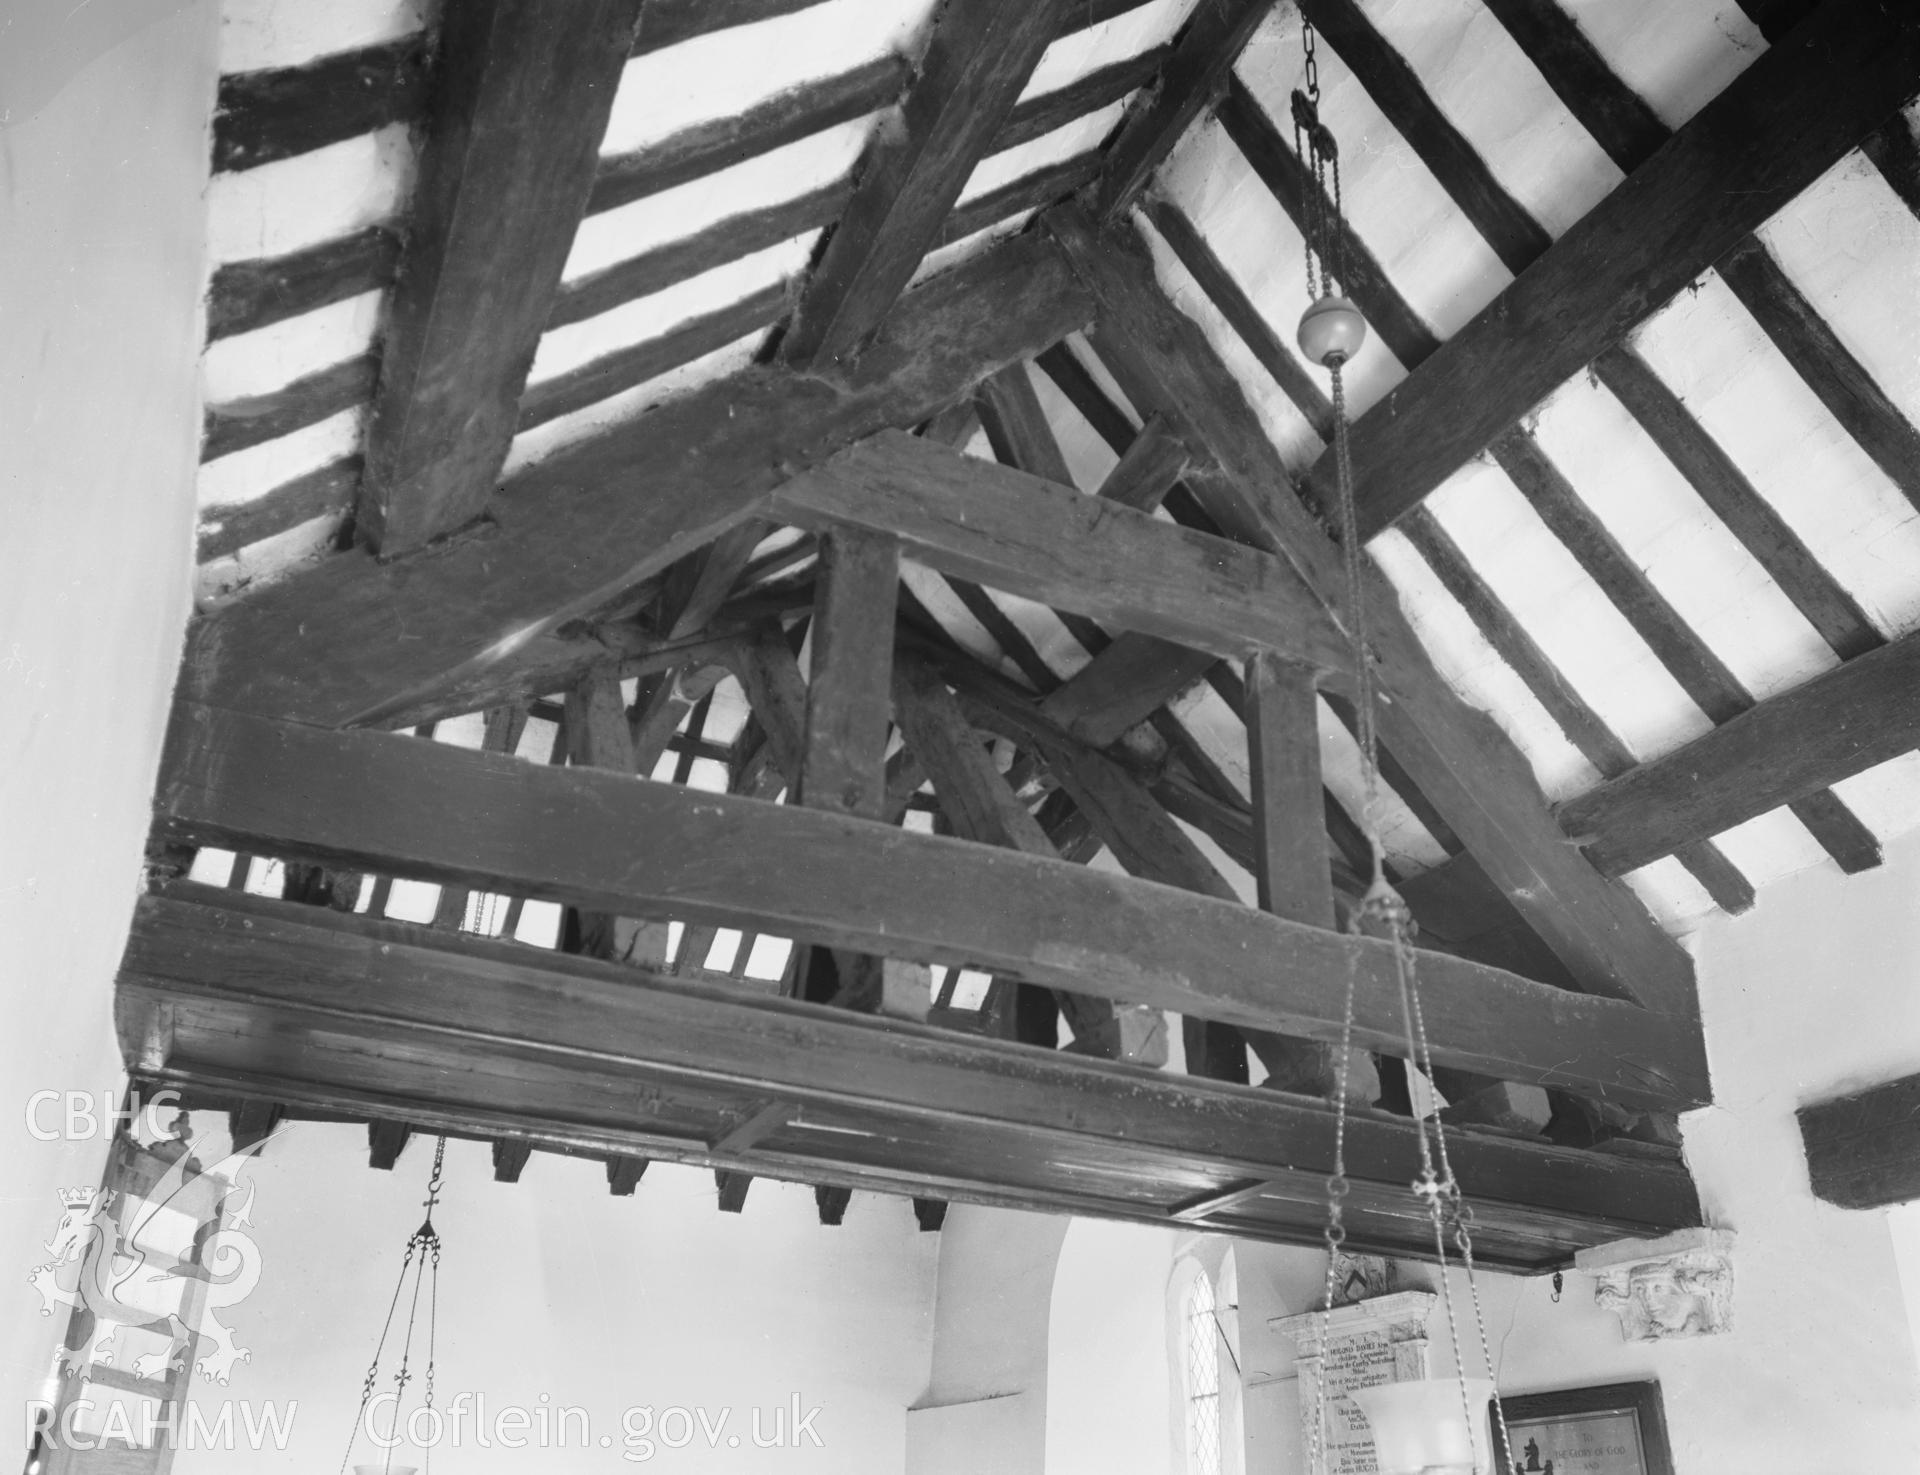 Interior view, roof timbers